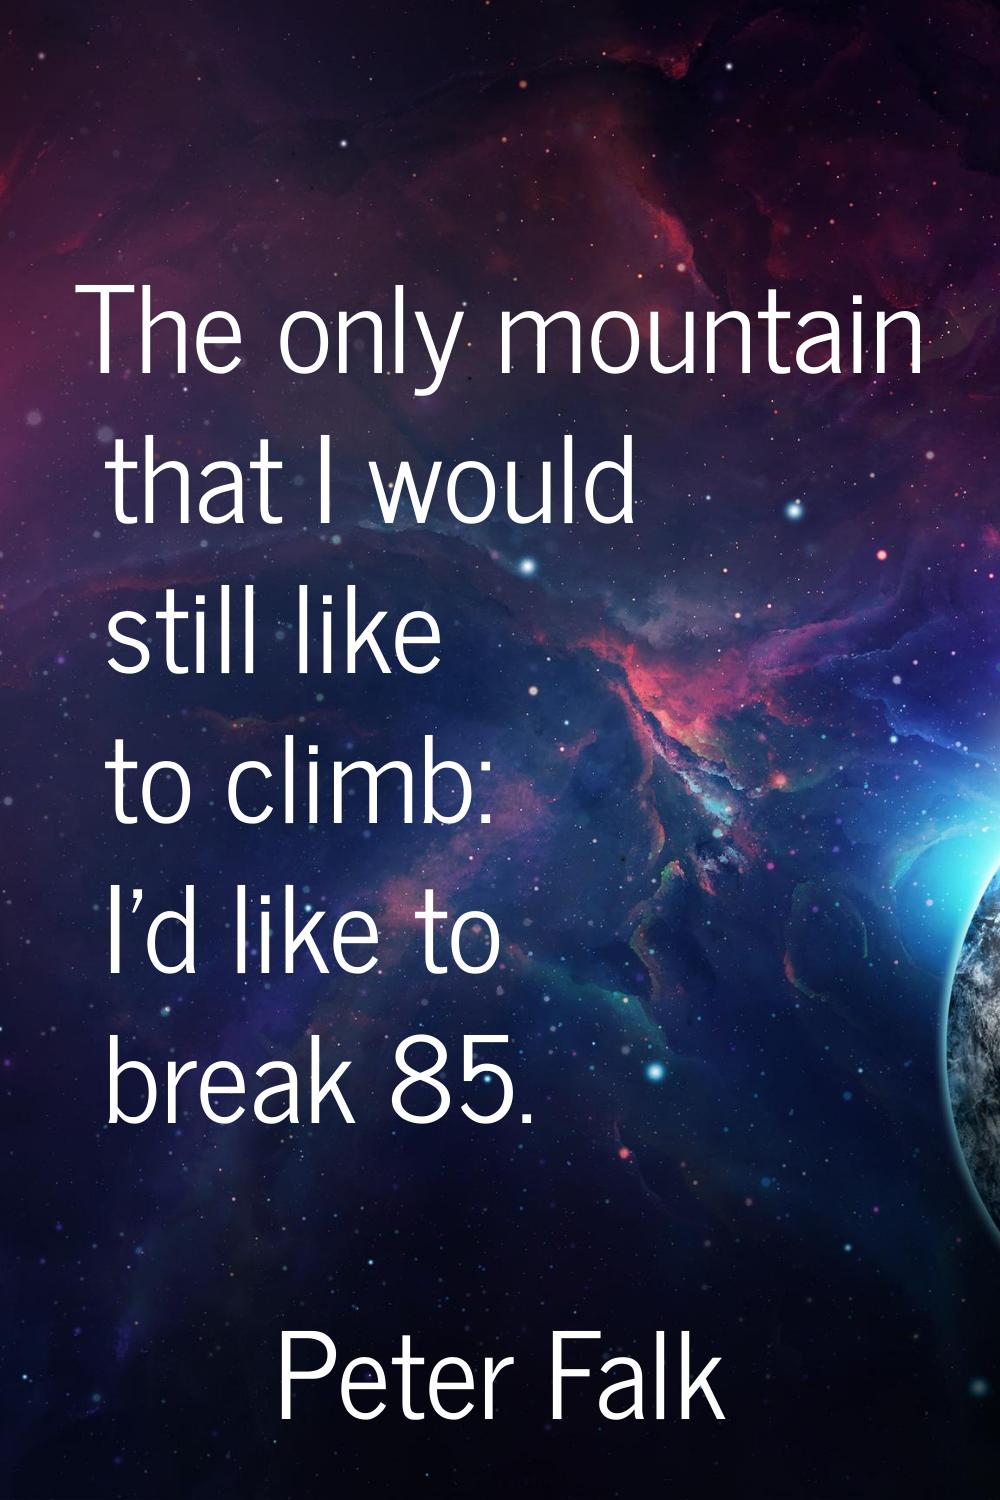 The only mountain that I would still like to climb: I'd like to break 85.